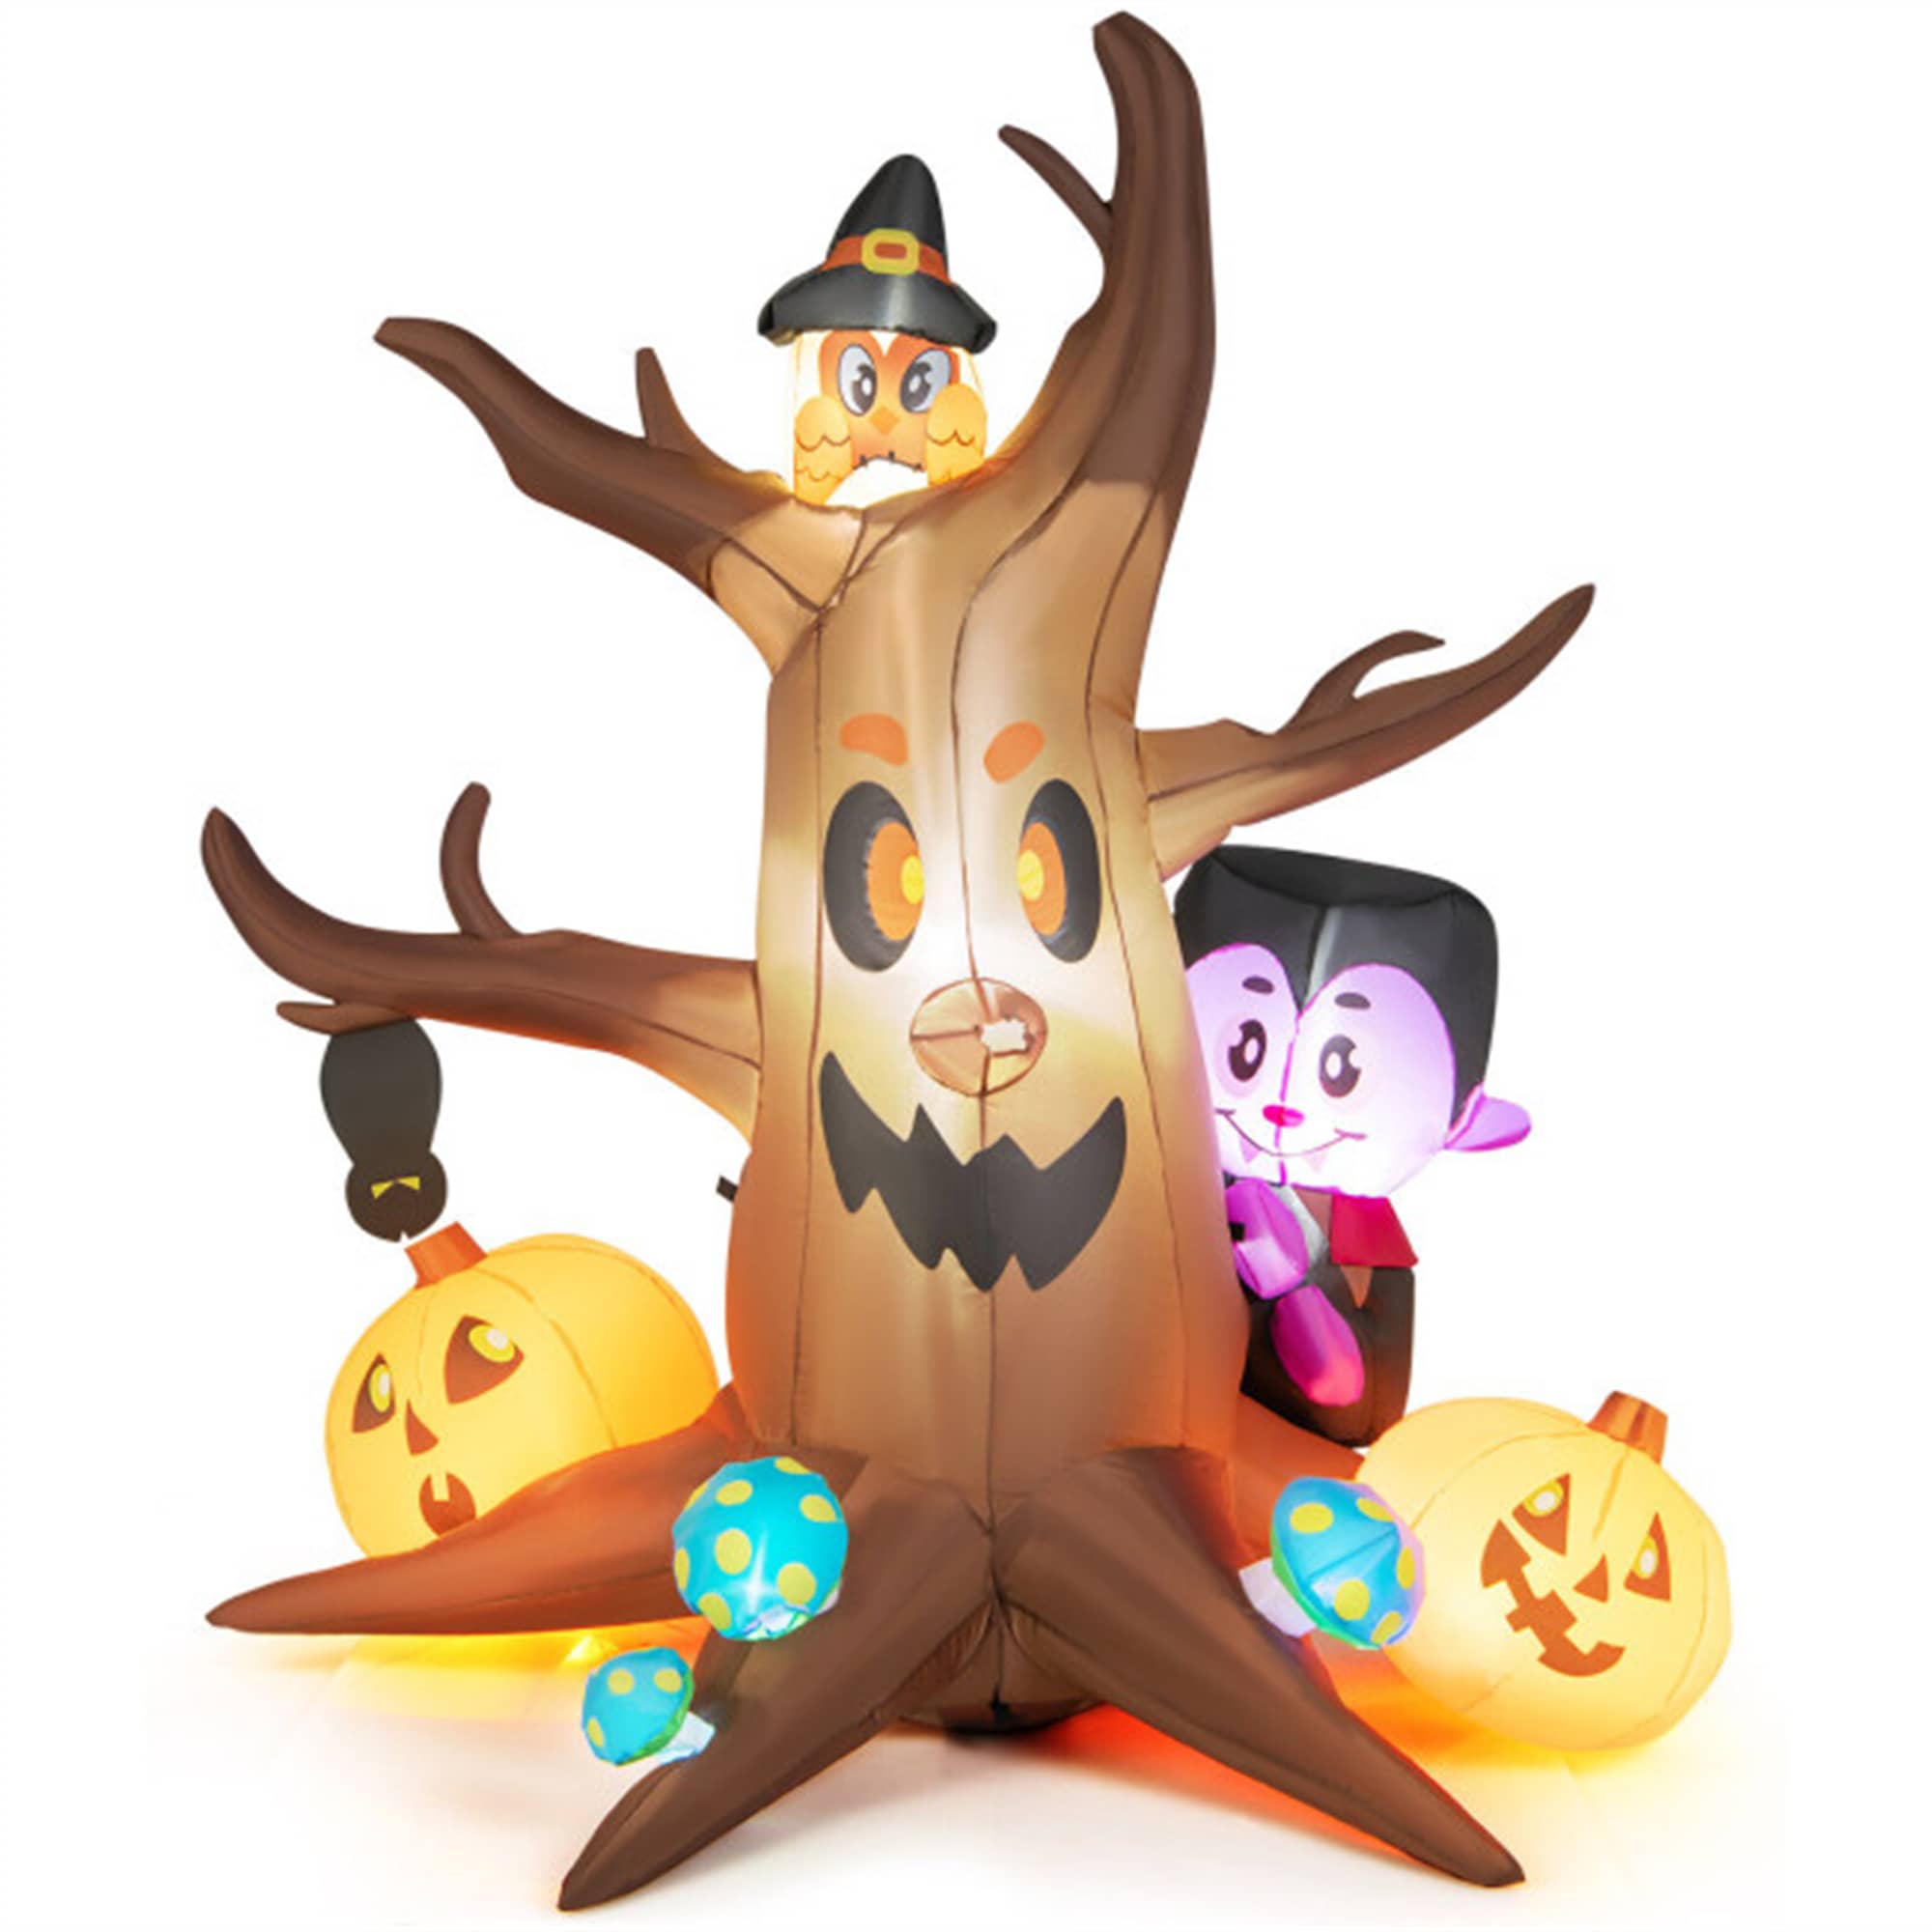 CASAINC 6 Feet Inflatable Halloween Dead Tree with Pumpkin Blow up Ghost Tree and RGB Lights